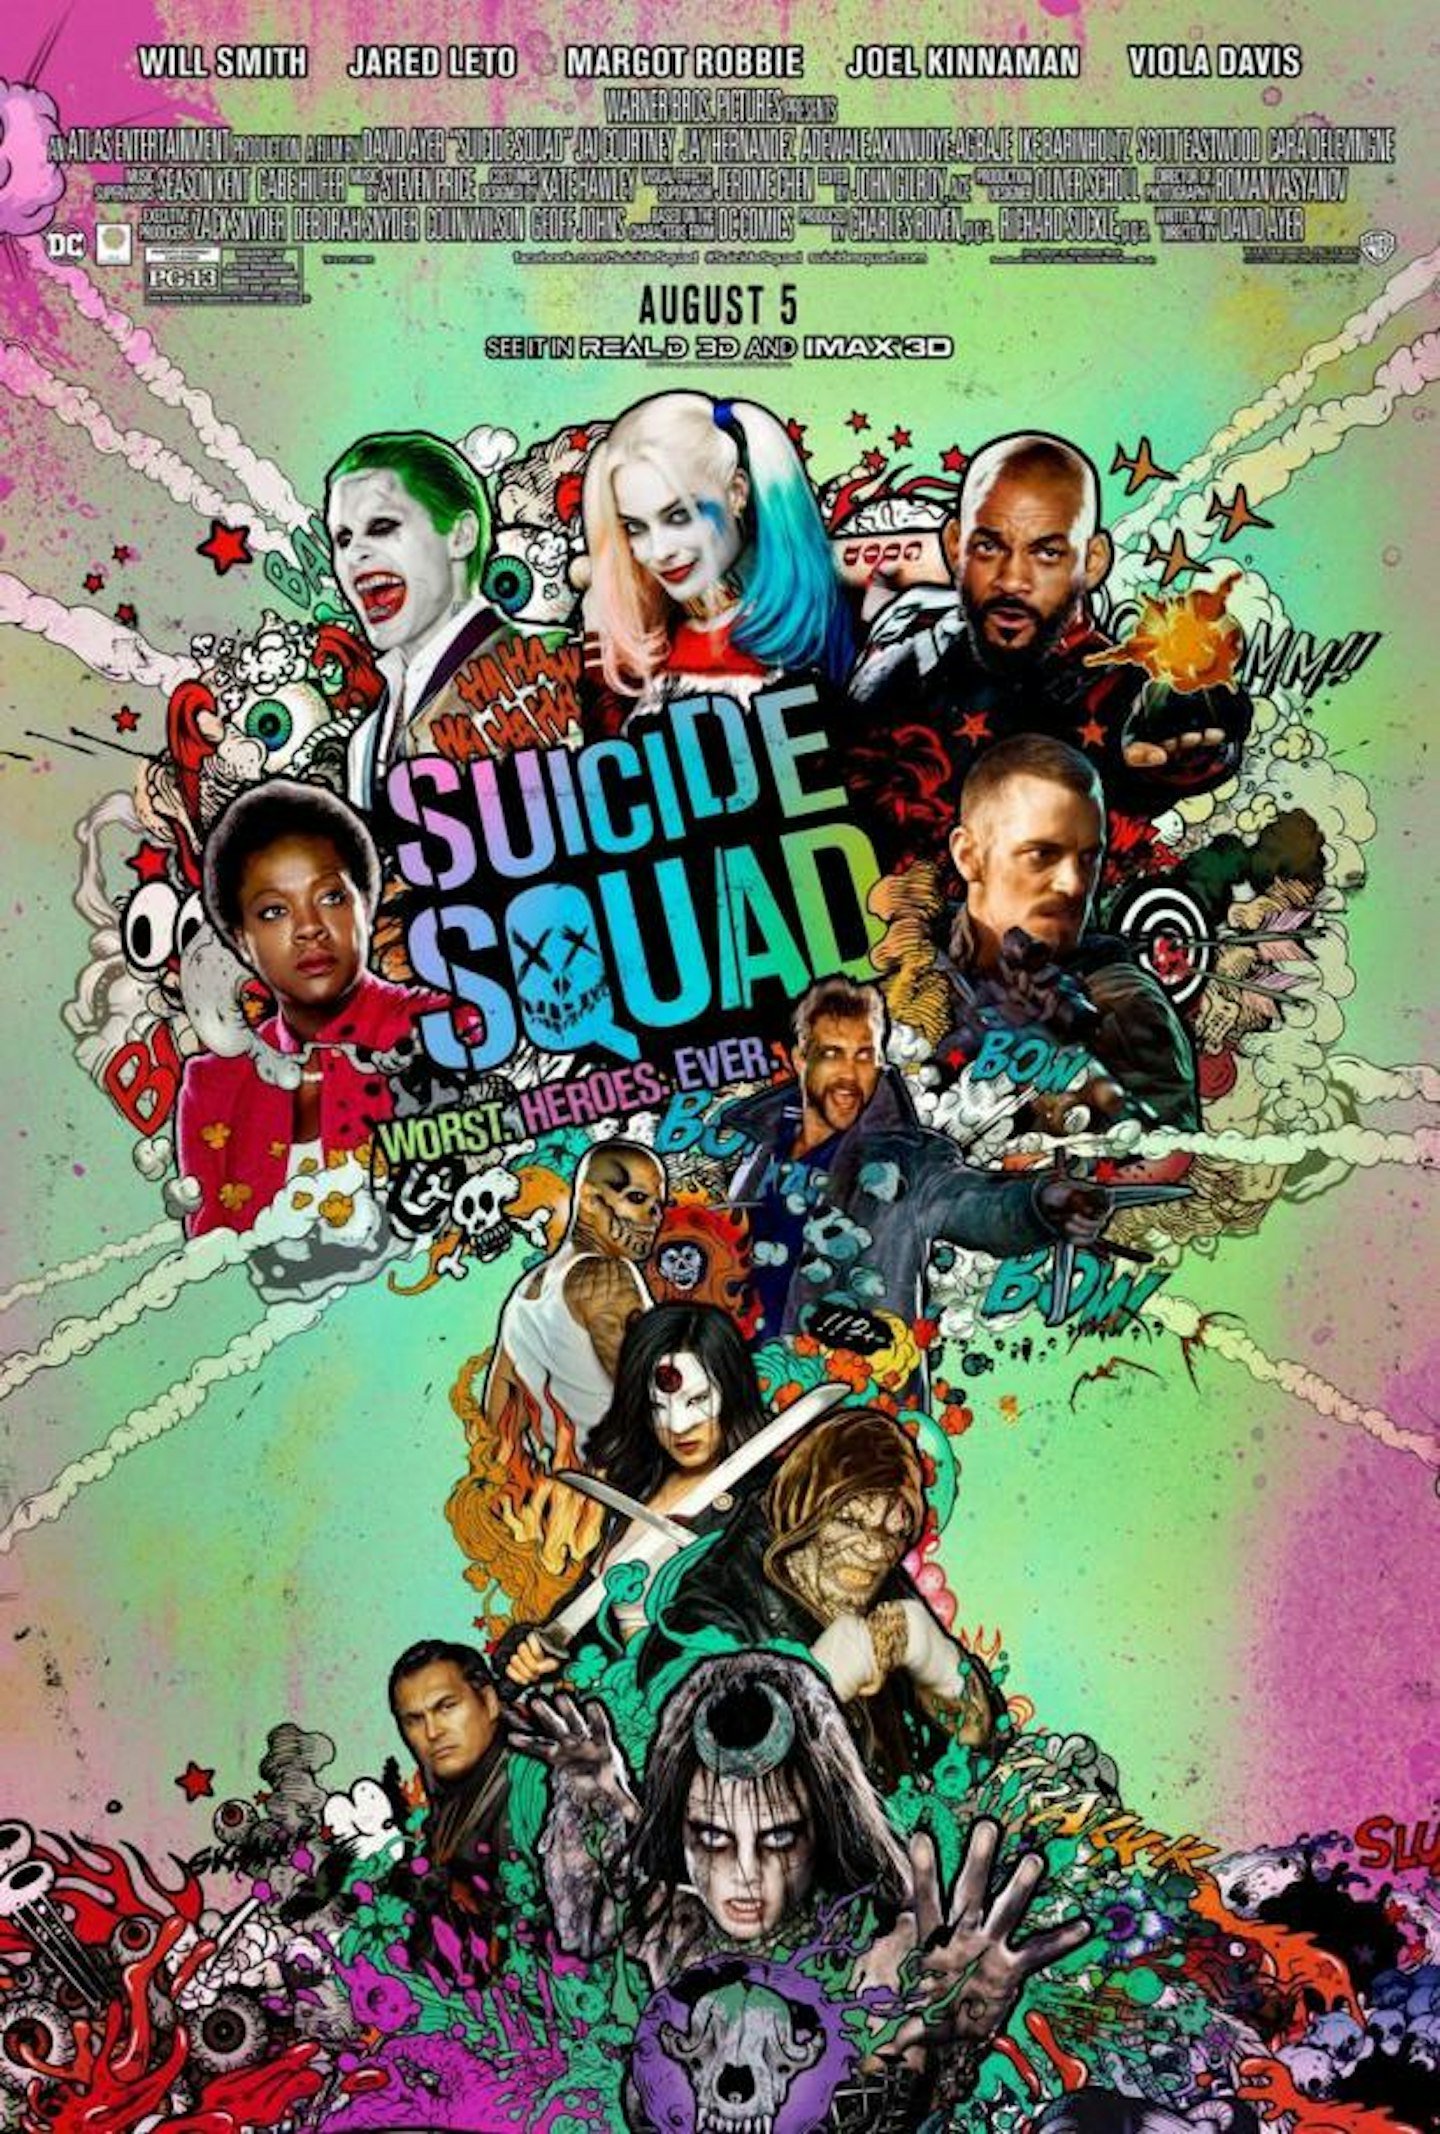 New Suicide Squad poster